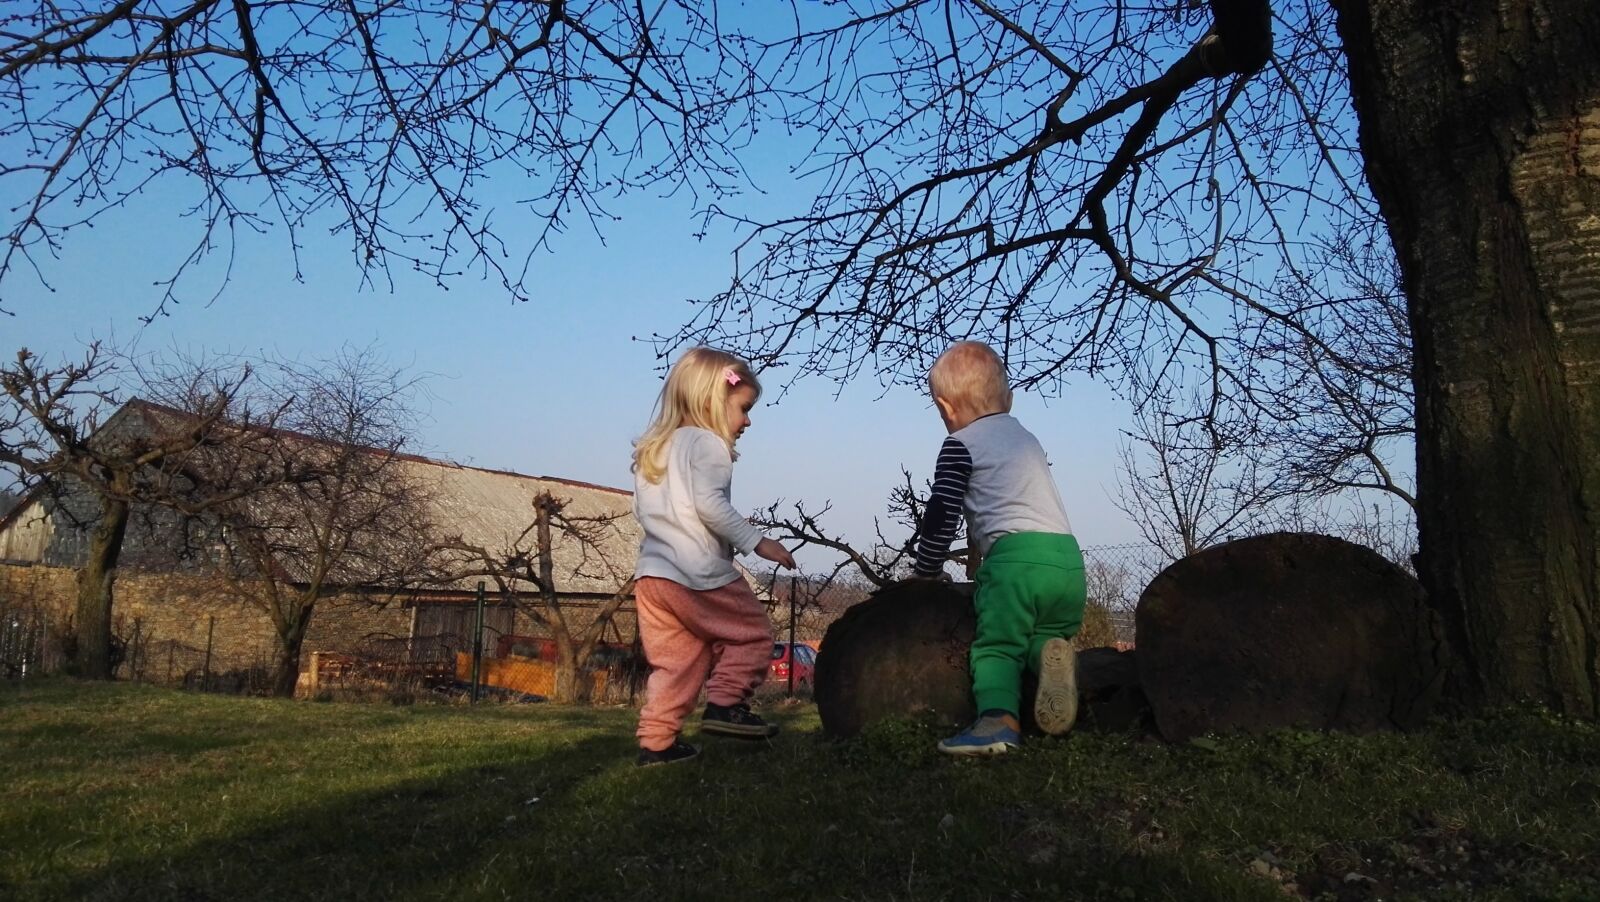 HUAWEI P8 sample photo. Children, countryside, compliance photography